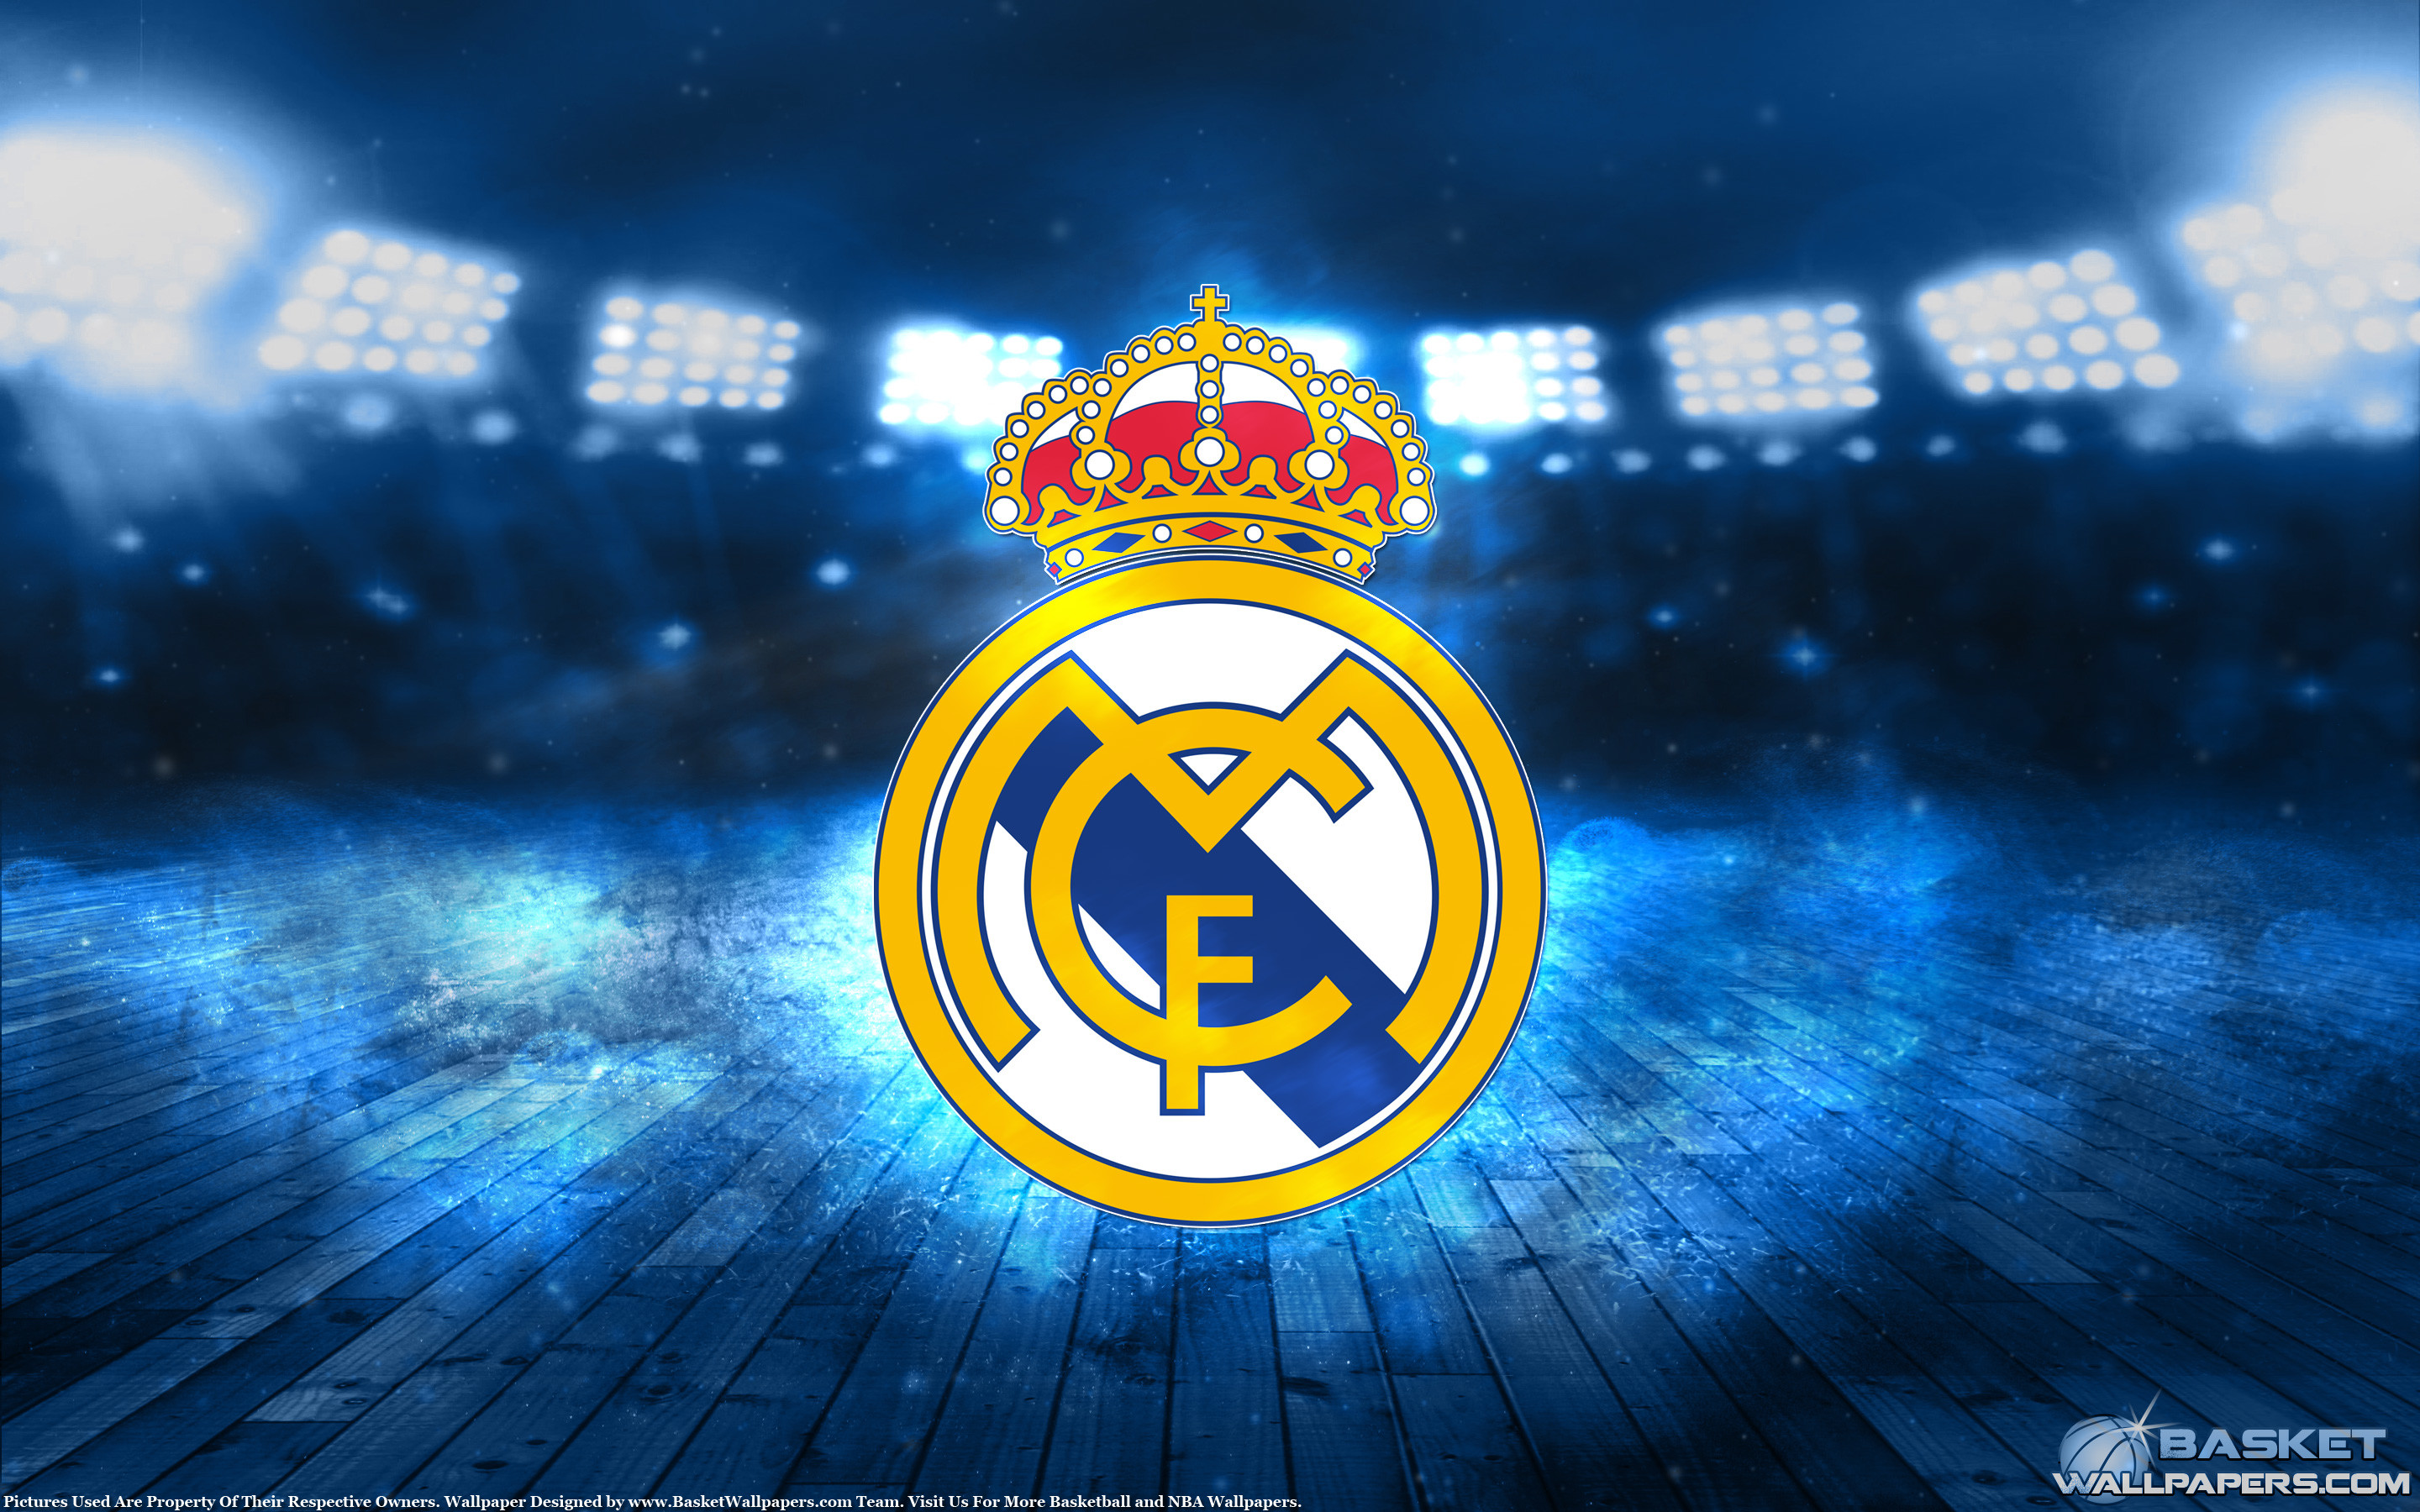 Free Download Real Madrid Wallpaper Full Hd 2018 72 Images 2880x1800 For Your Desktop Mobile Tablet Explore 25 Real Madrid 2018 Wallpapers Real Madrid 2018 Wallpapers Real Madrid 2018 2019 Wallpapers Real Madrid Team 2018 Wallpapers